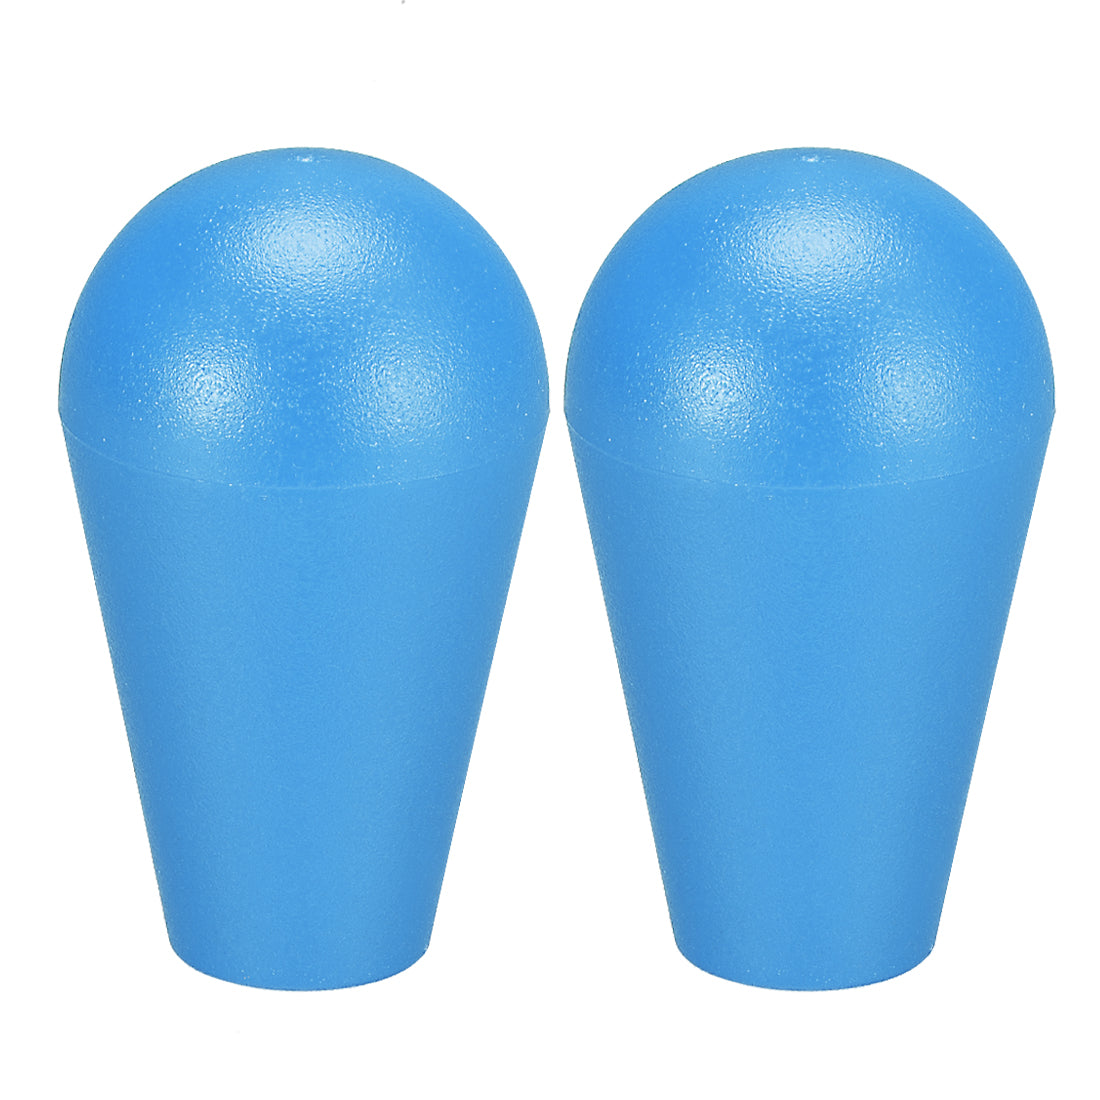 uxcell Uxcell Ellipse Oval Joystick Head Rocker Ball Top Handle American Type Arcade Game DIY Parts Replacement Blue 2Pcs